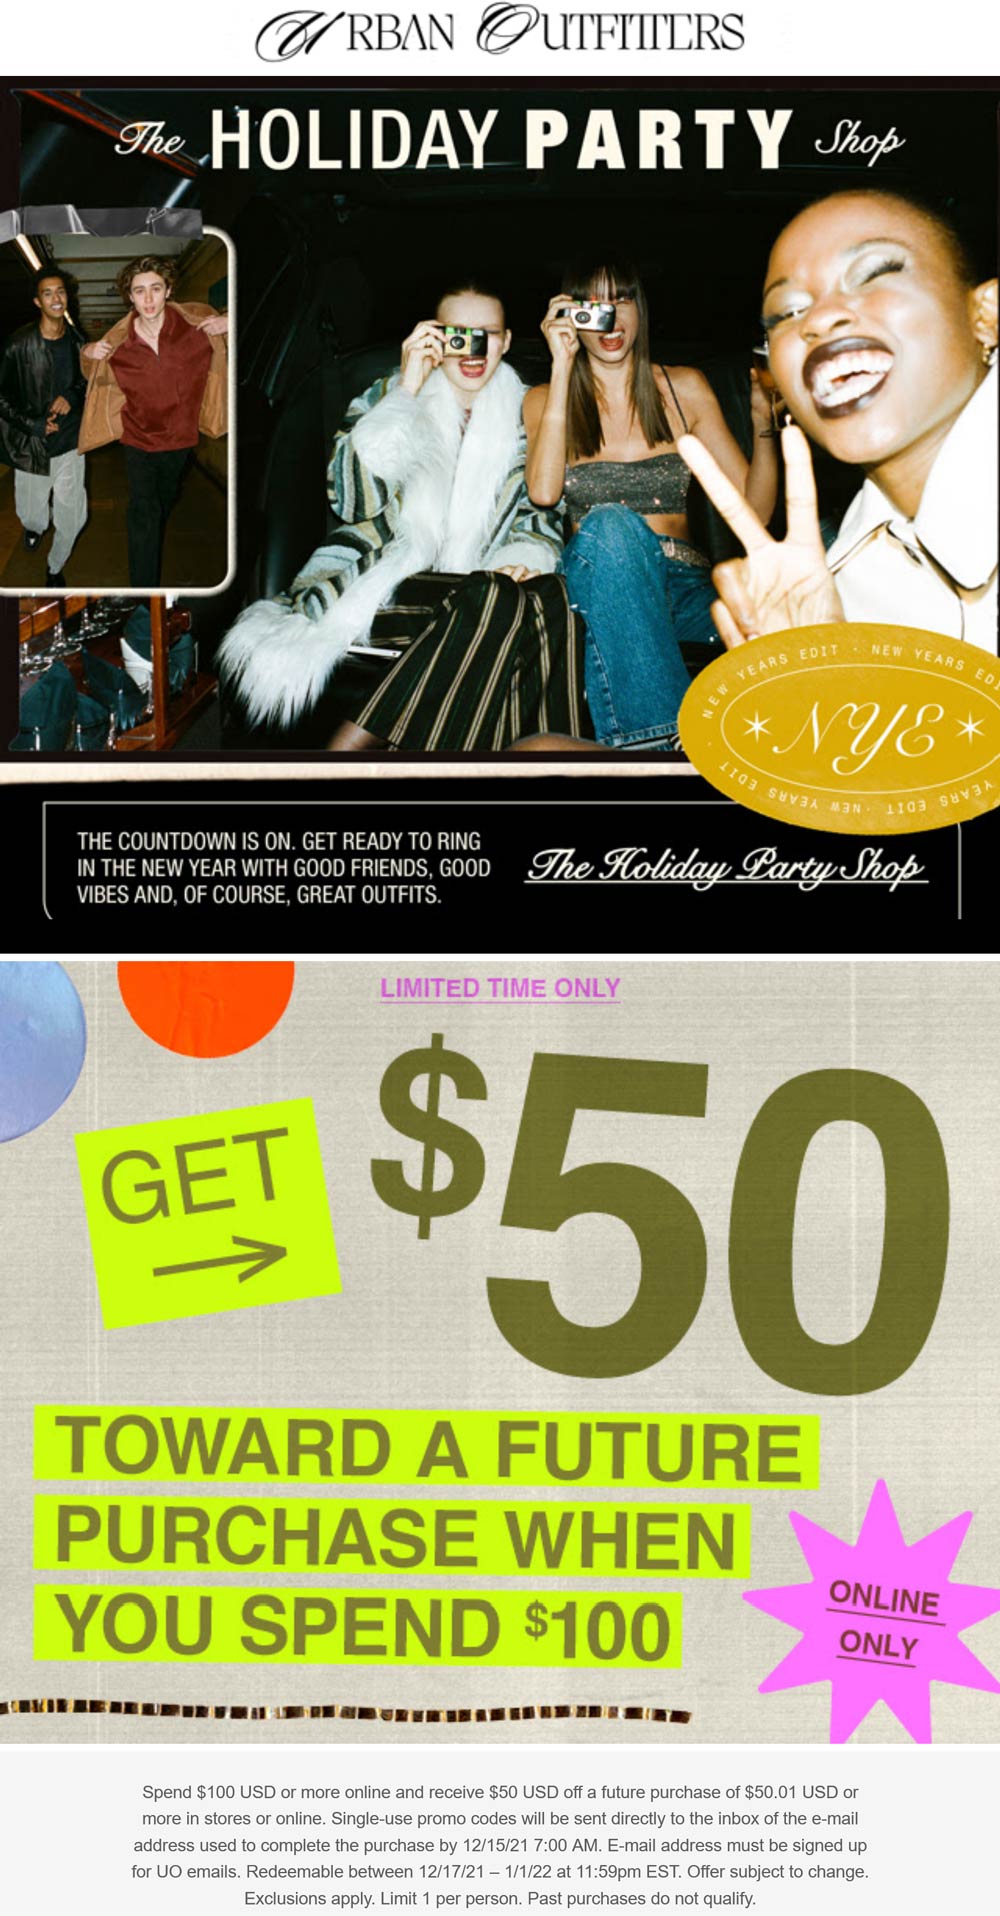 Urban Outfitters stores Coupon  Spend $100 get future $50 off online at Urban Outfitters #urbanoutfitters 